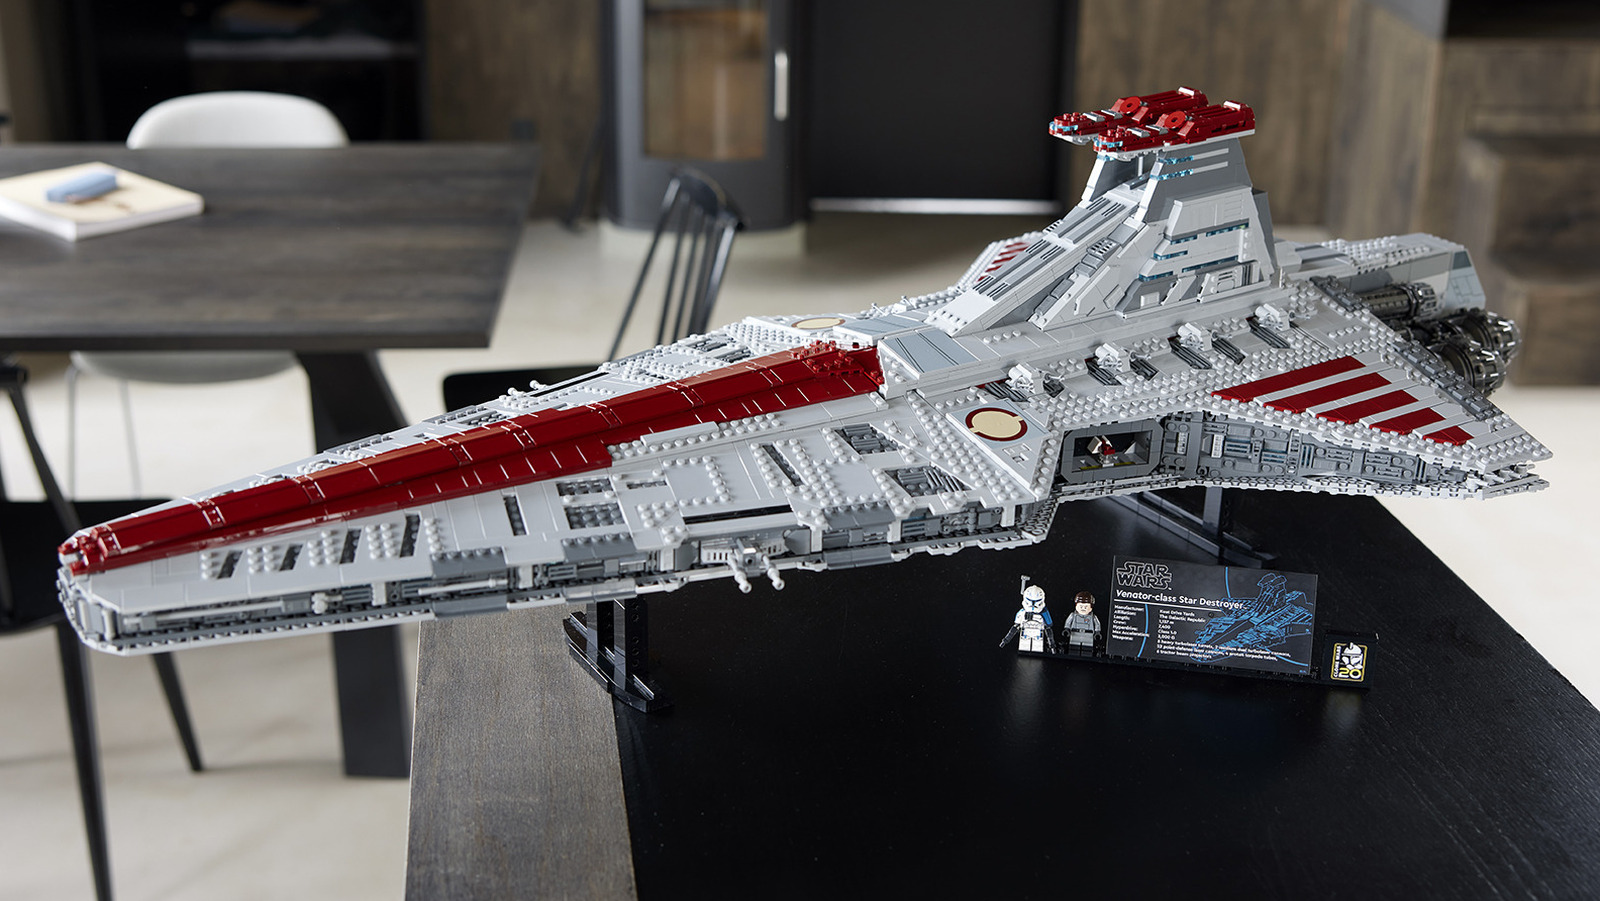 Cool Stuff: Celebrate 20 Years Of Clone Wars With LEGO's Star Wars Venator-Class Star Destroyer